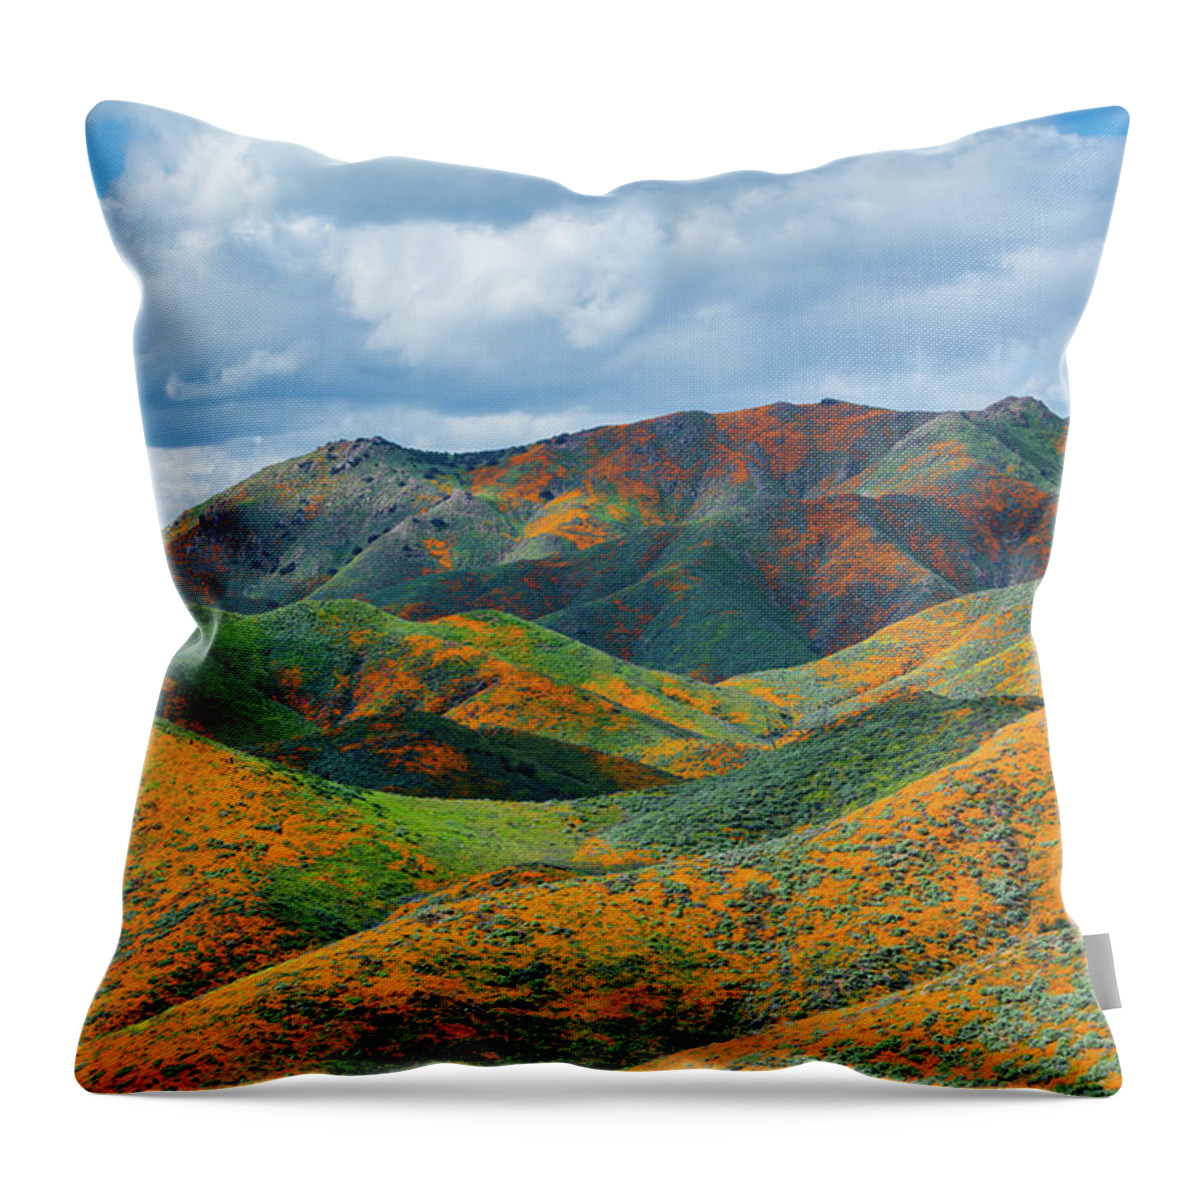 California Poppy Throw Pillow featuring the photograph Lake Elsinore Poppy Hills by Kyle Hanson